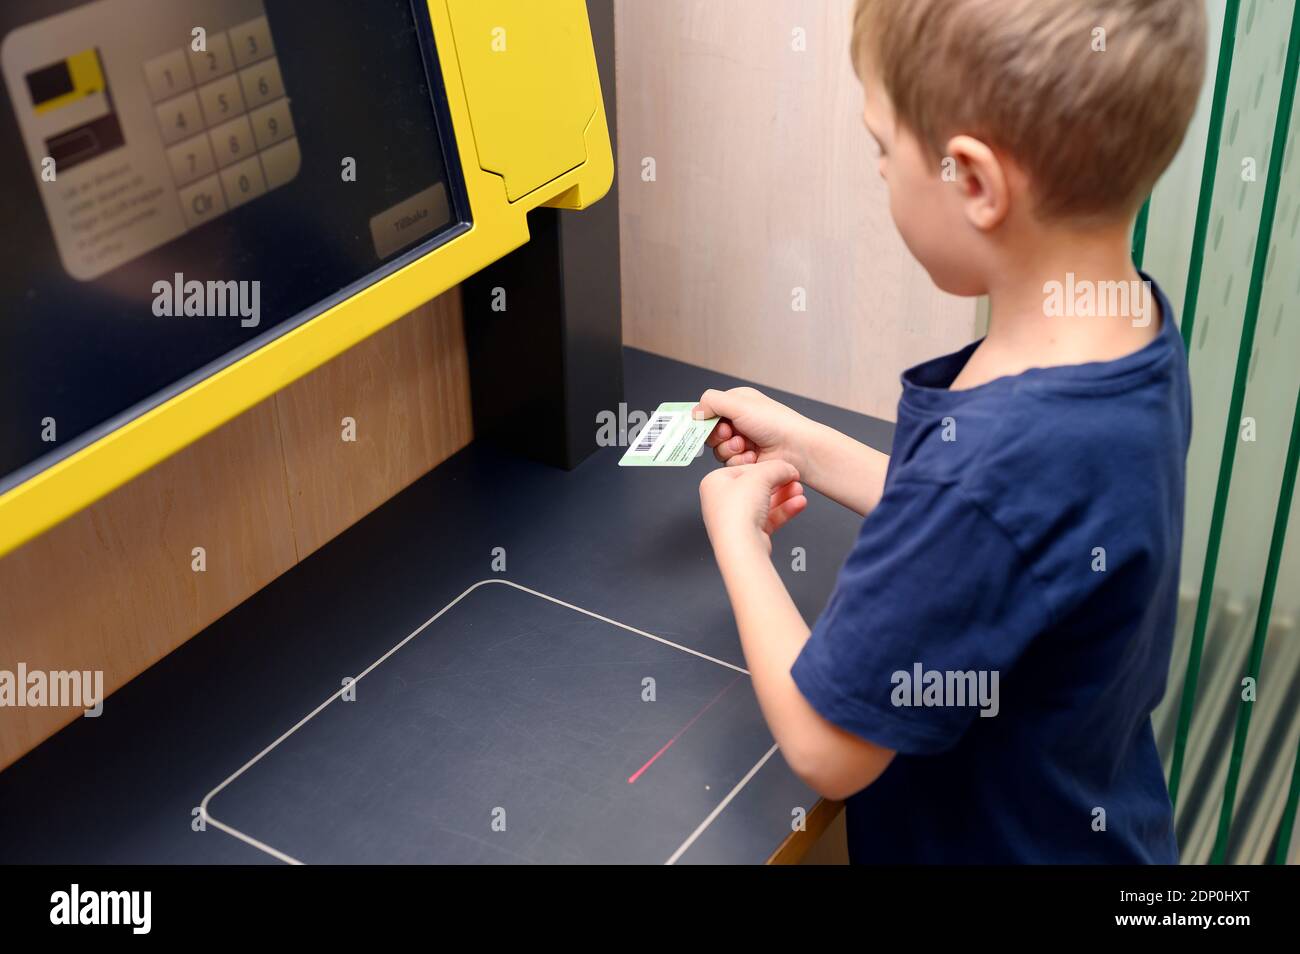 Boy using self service point in library Stock Photo